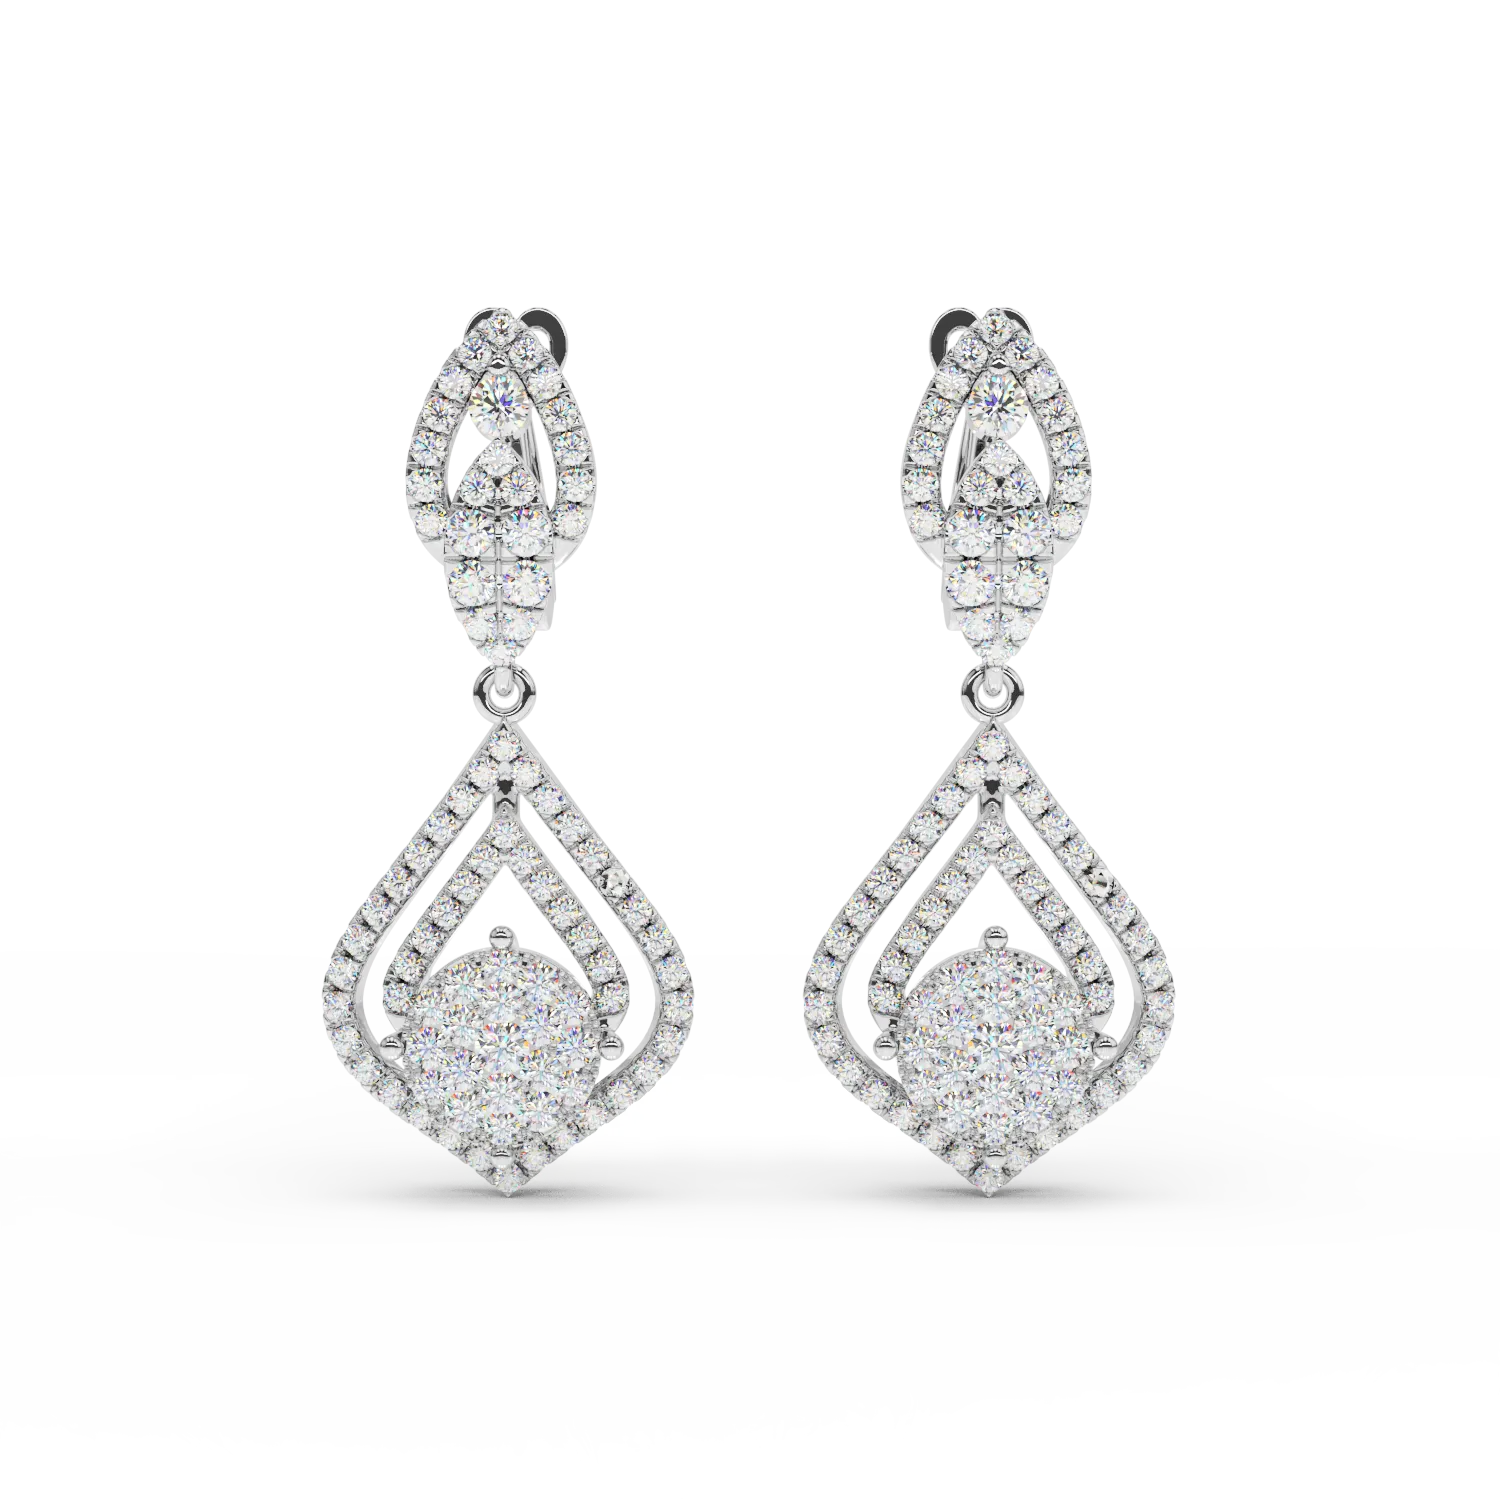 18K white gold earrings with 1.6ct diamonds